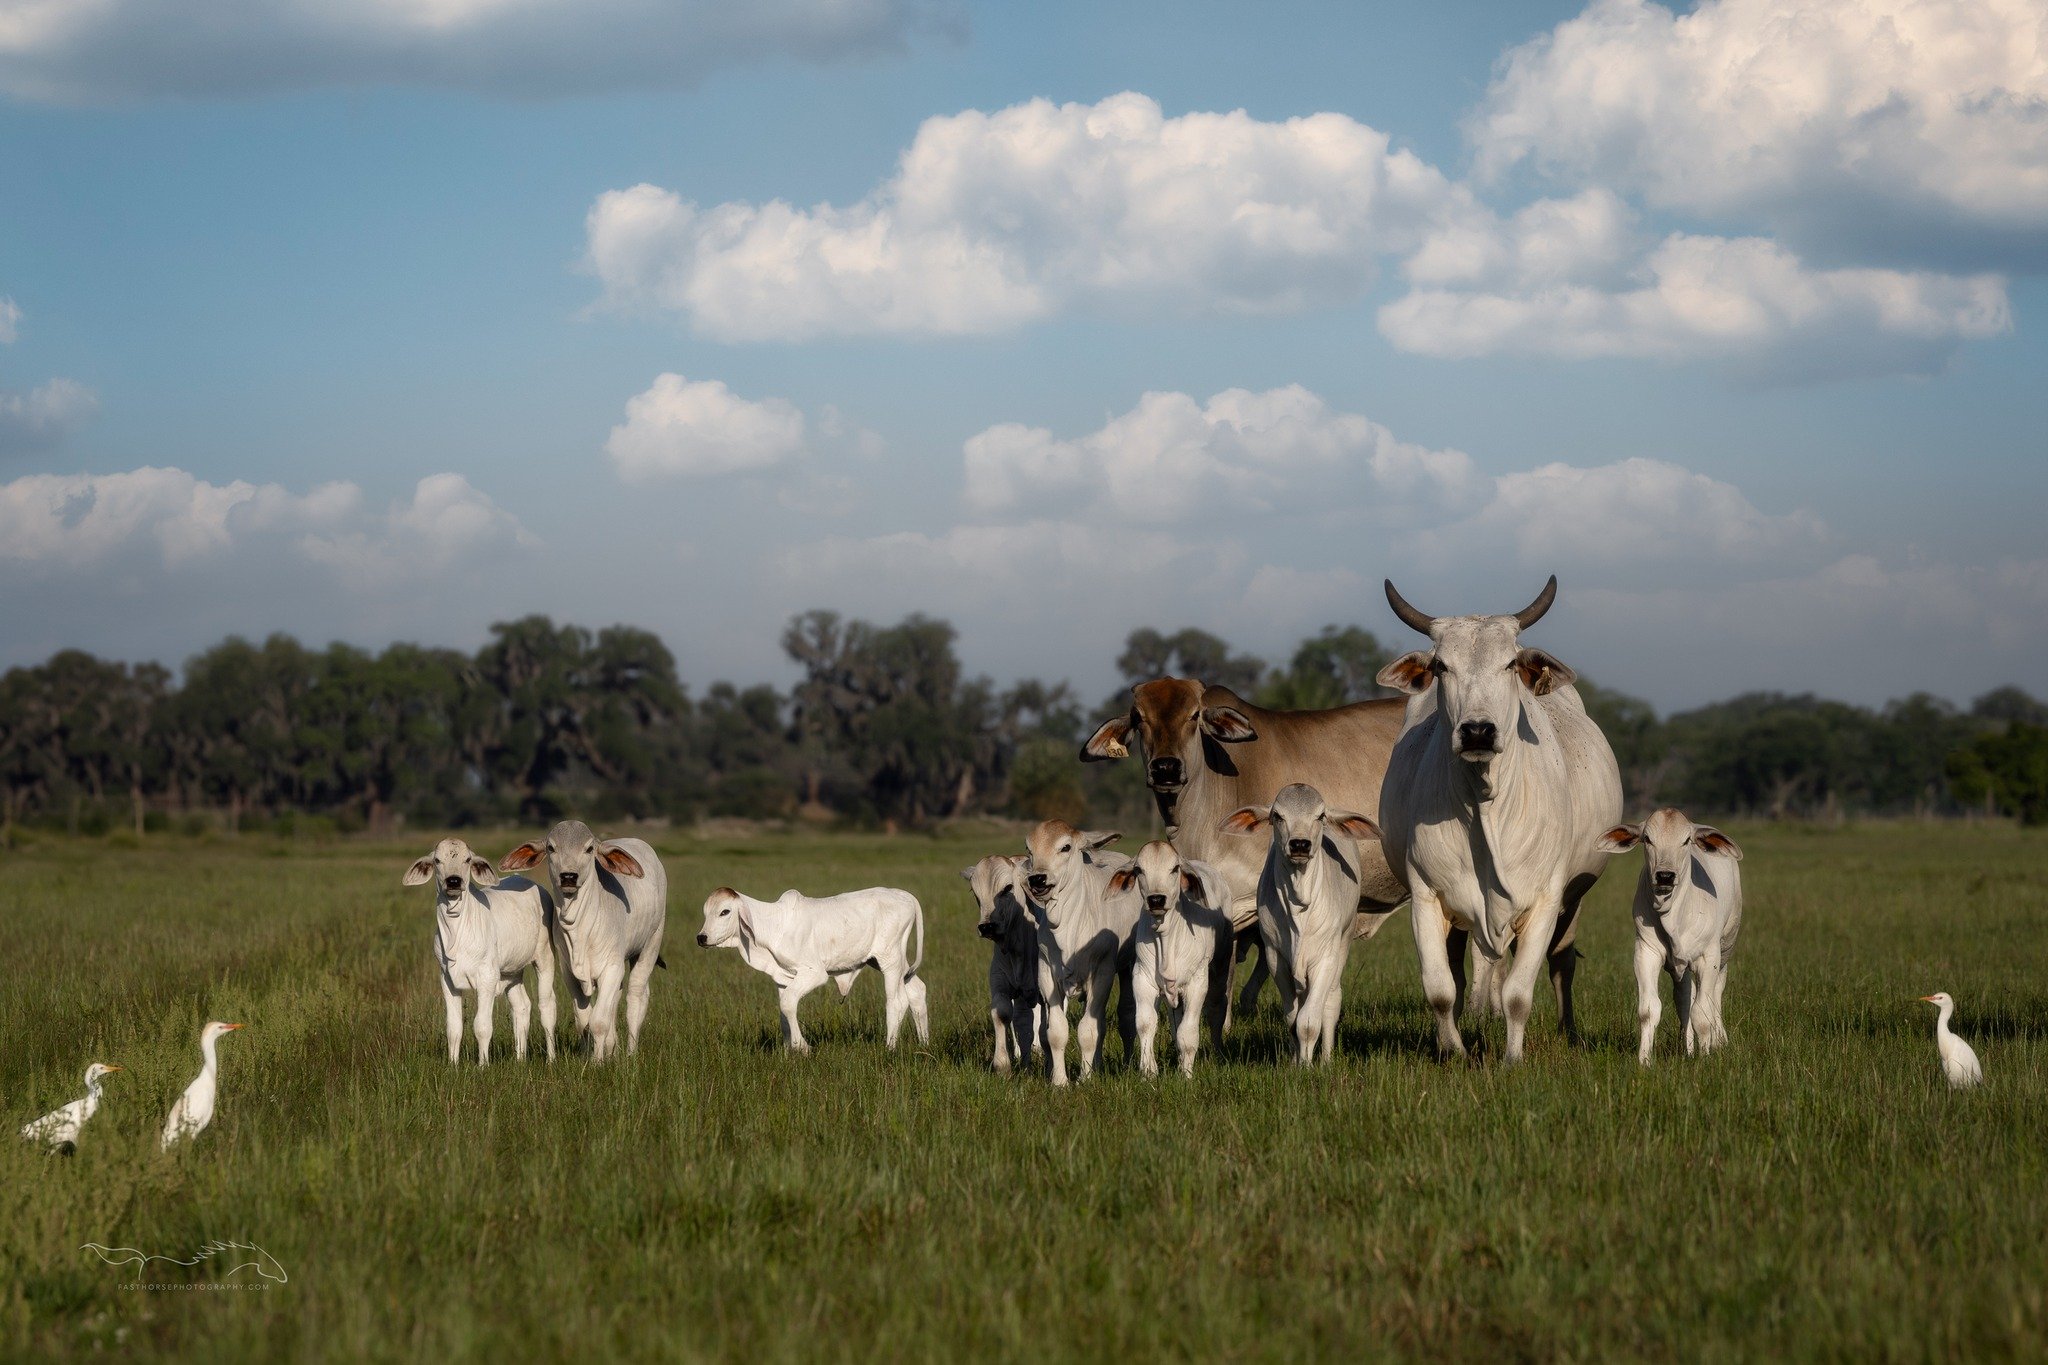 I spent yesterday morning photographing all the Spring babies at Cracker Swamp Cattle Co. The Brahman &quot;nursery&quot; was the cutest! The rest of the herd was just out of frame, but I loved how all the little calves were hanging together. Big tha